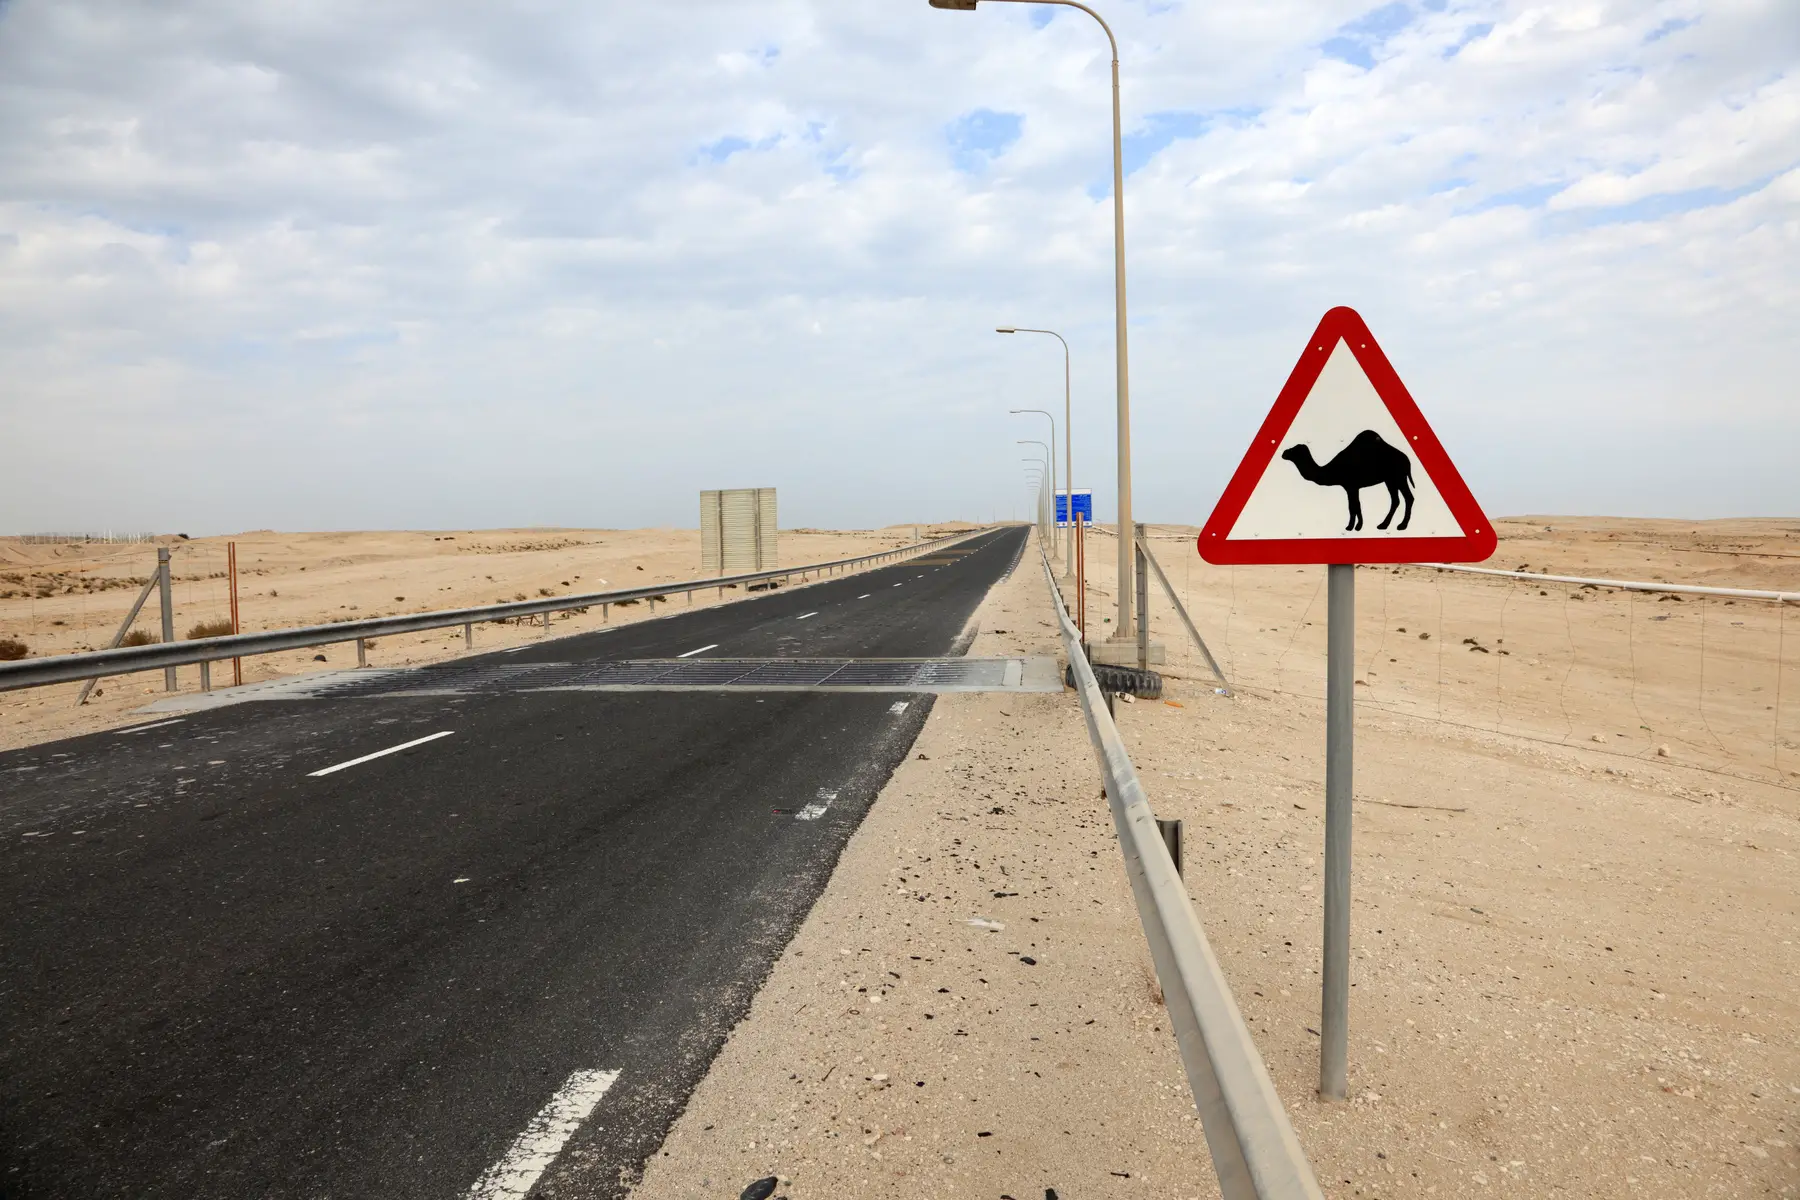 Road sign warning about camels